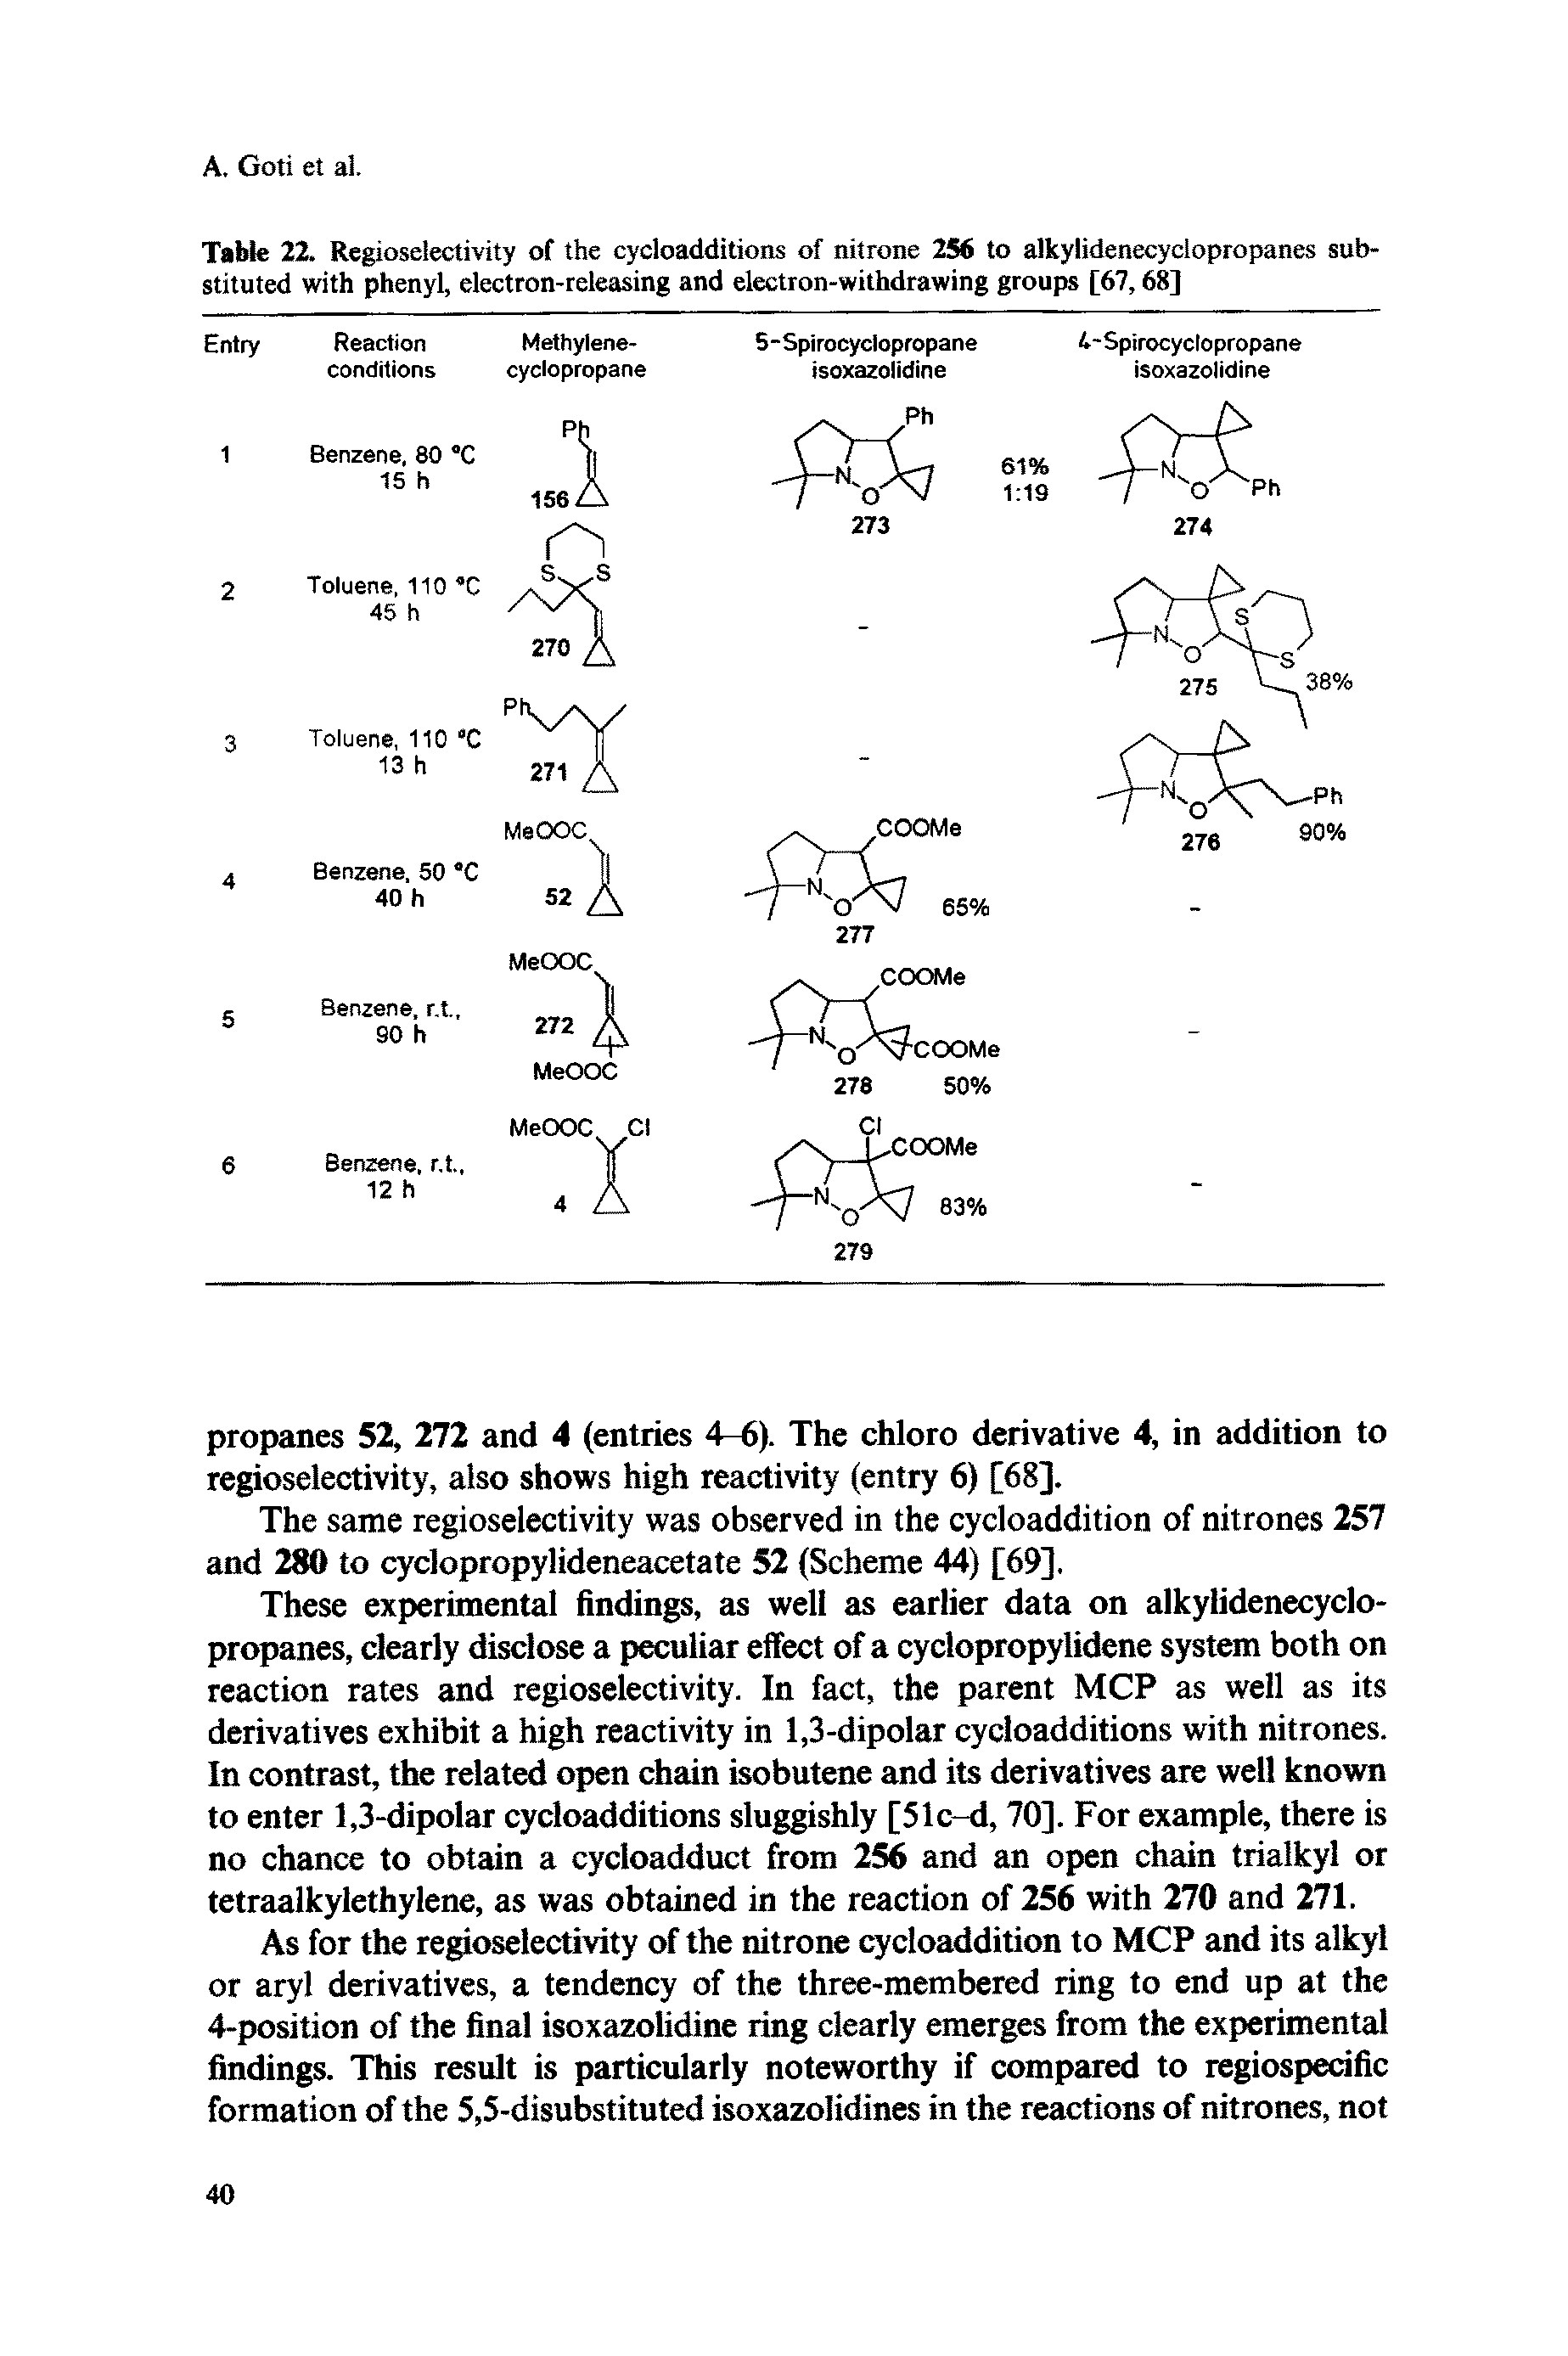 Table 22. Regioselectivity of the cycloadditions of nitrone 256 to alkylidenecyclopropanes substituted with phenyl, electron-releasing and electron-withdrawing groups [67,68]...